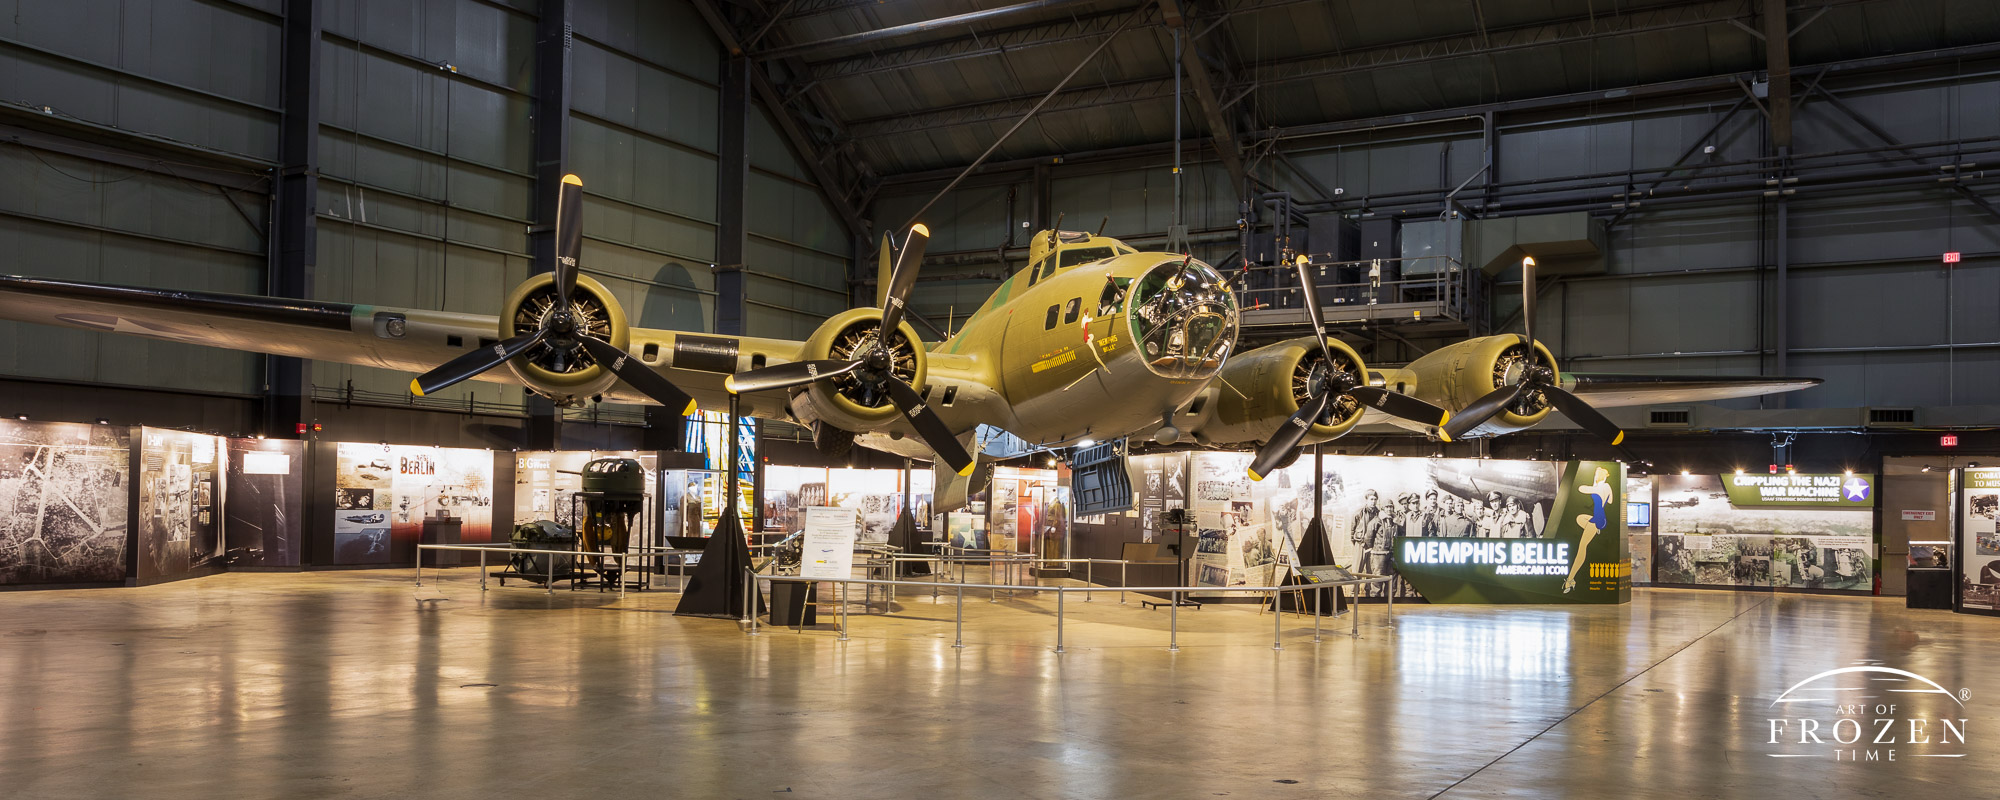 The famous and recently restored B-17 Memphis Belle displayed with its landing wheels retracted and its bomb bay doors open at the National Museum of the US Air Force